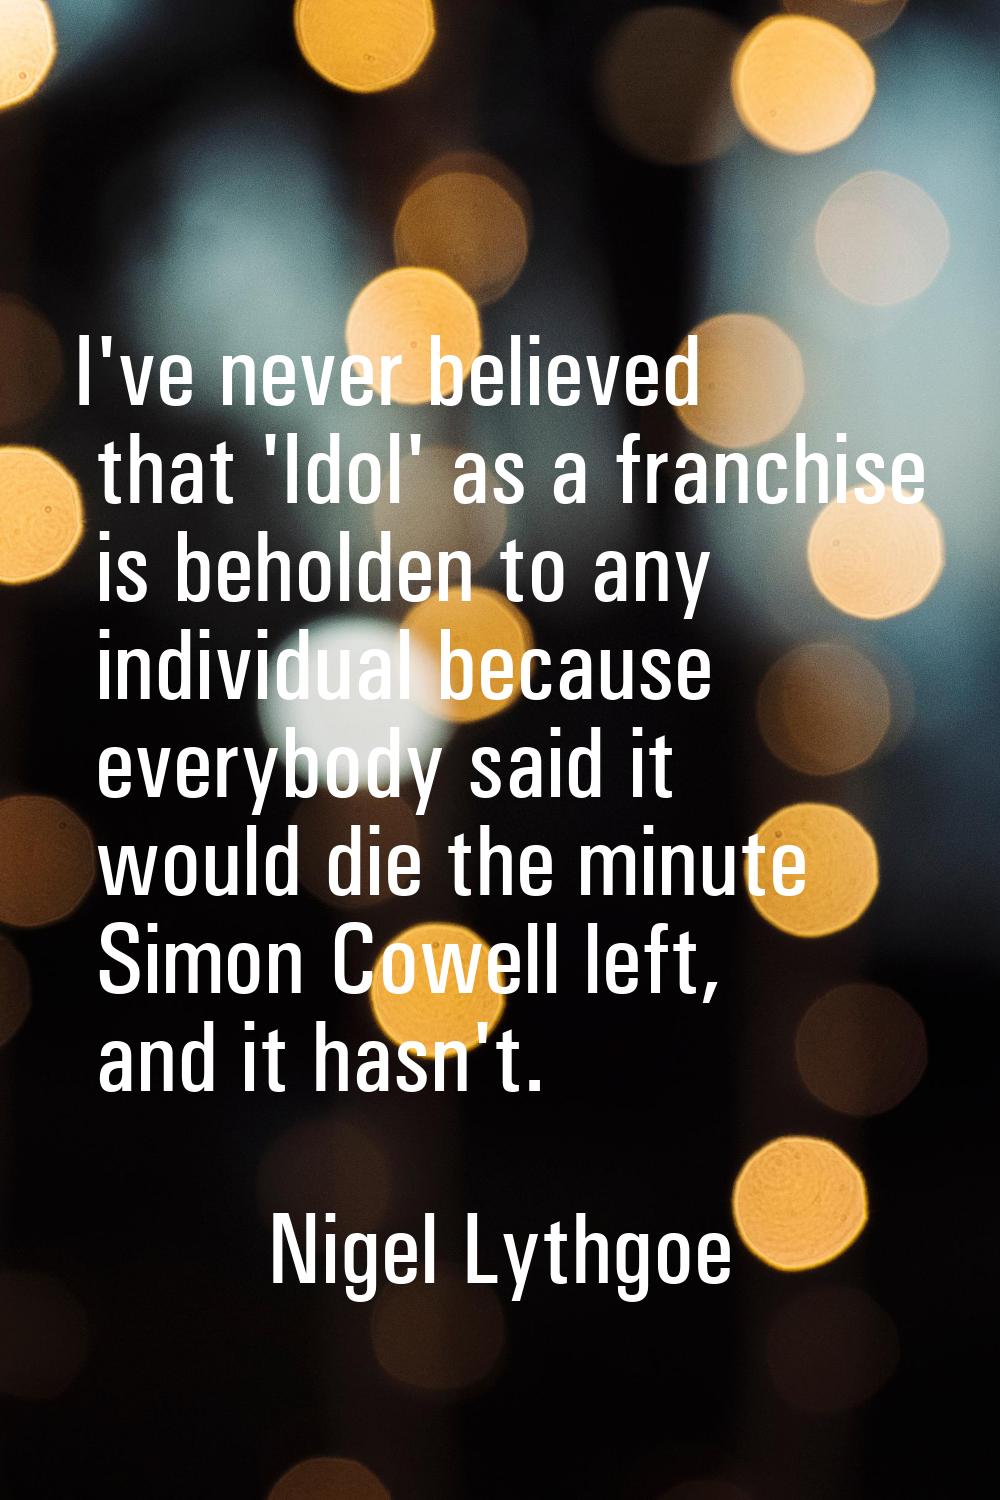 I've never believed that 'Idol' as a franchise is beholden to any individual because everybody said